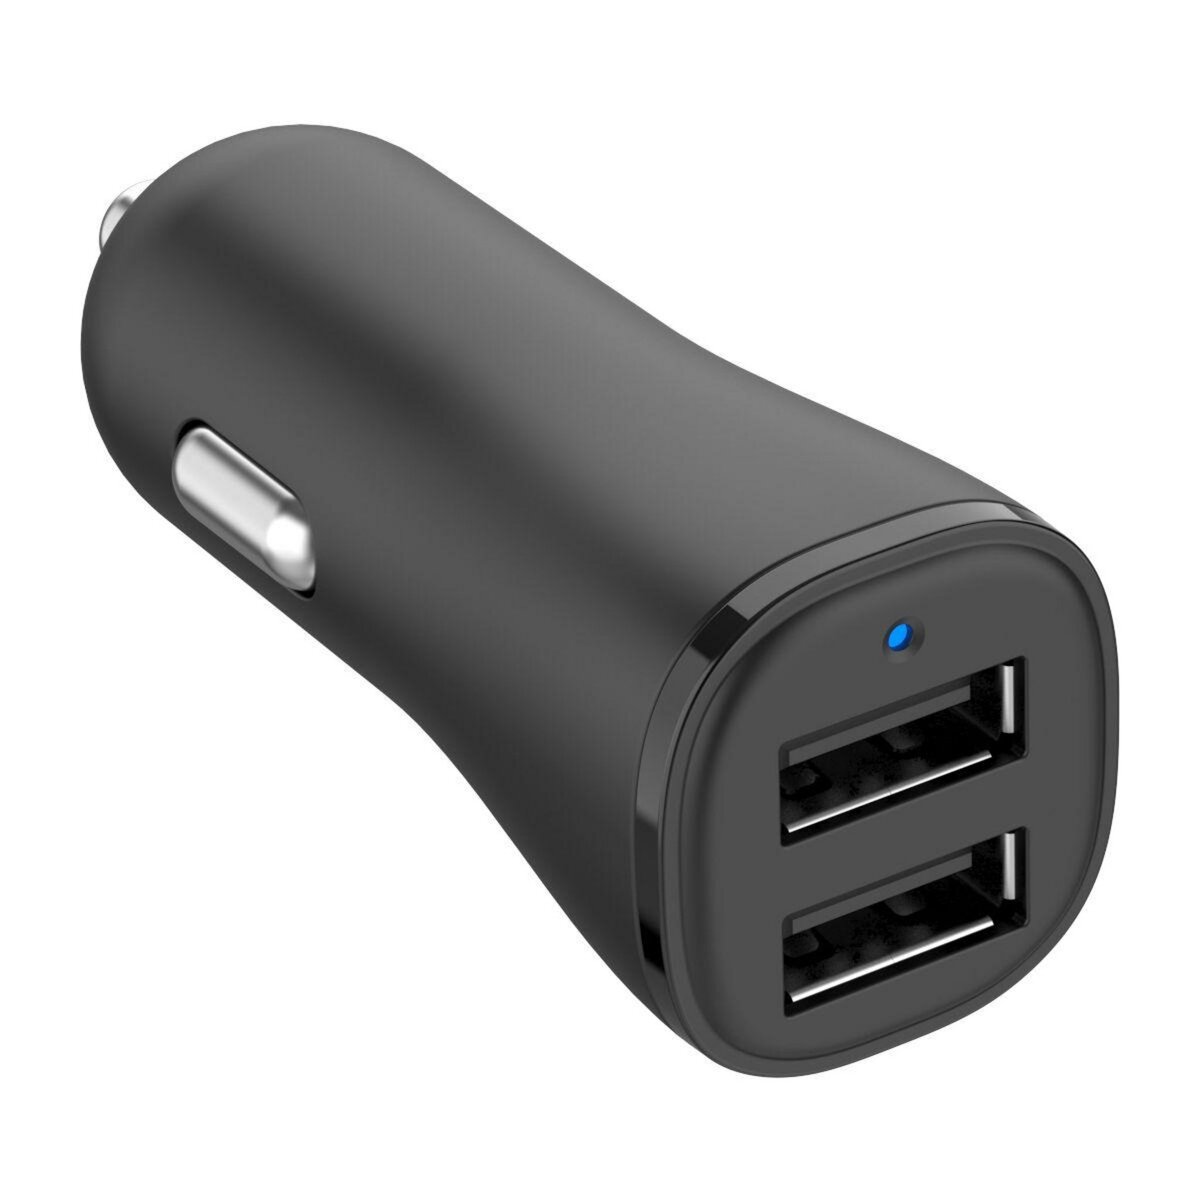 Chargeur USB allume-cigare publicitaire - adaptateur USB type C - 24 Watts